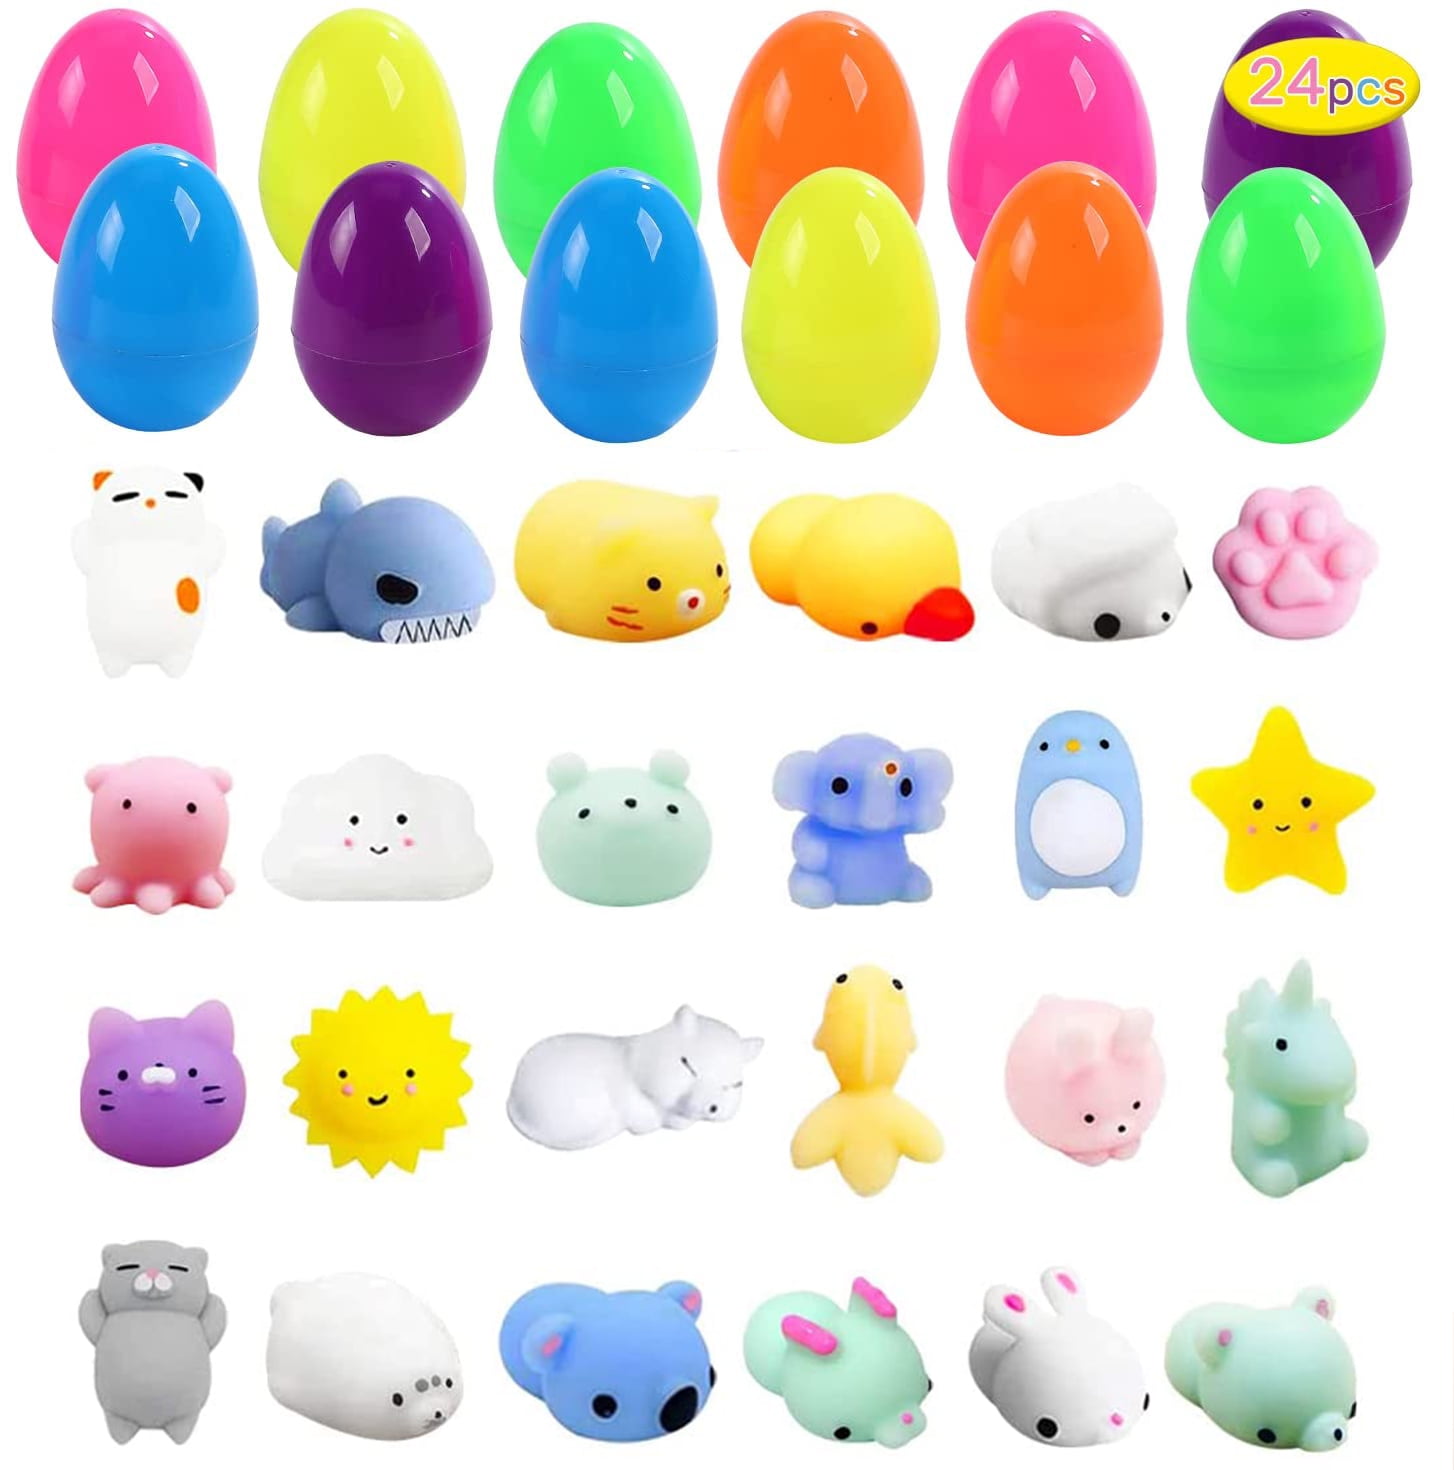 7 Colorful Prefilled Easter Eggs with Toys Surprise Hunt Decorations Easter Basket Stuffers 24 Pack Easter Egg Bunny Push it Pop Sensory Fidgets Toys Gifts for Kids Girls Boys Theme Party Favors 